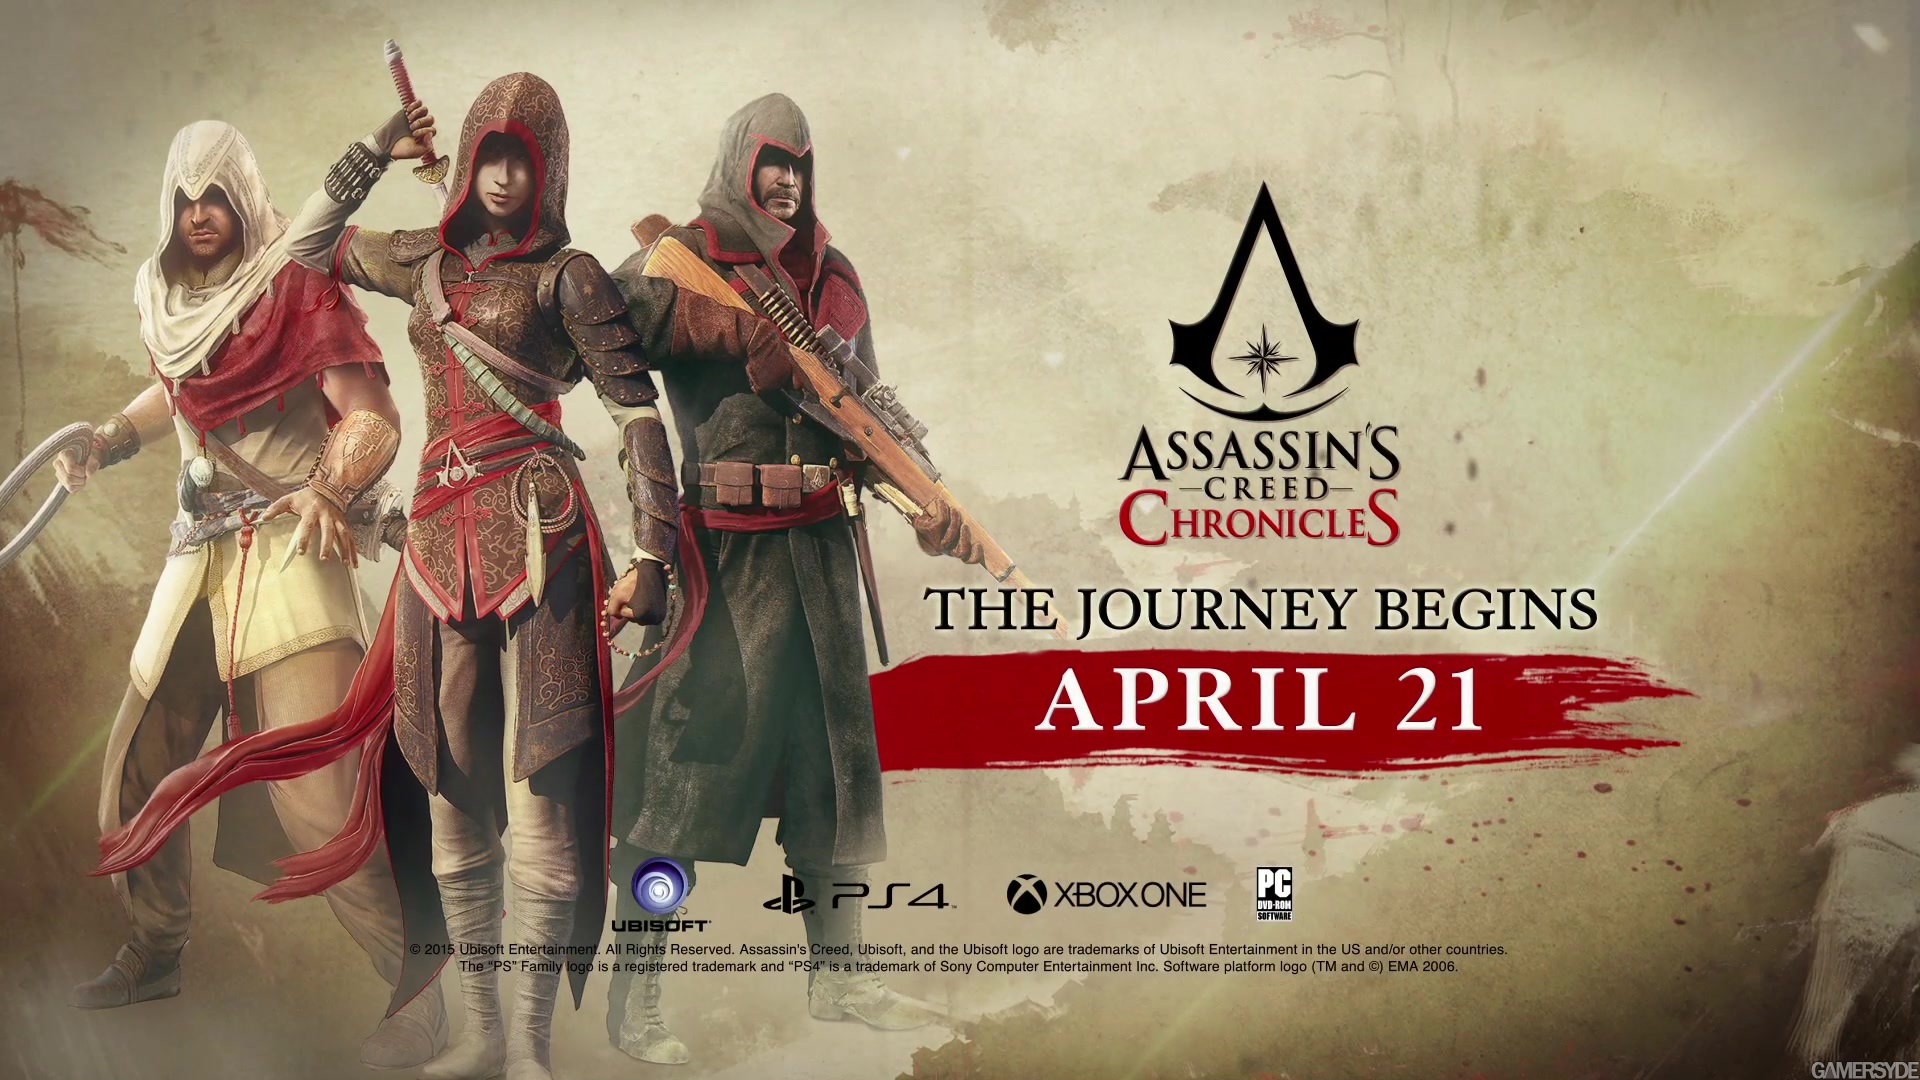 http://images.gamersyde.com/image_assassin_s_creed_chronicles_trilogy-27992-3203_0012.jpg